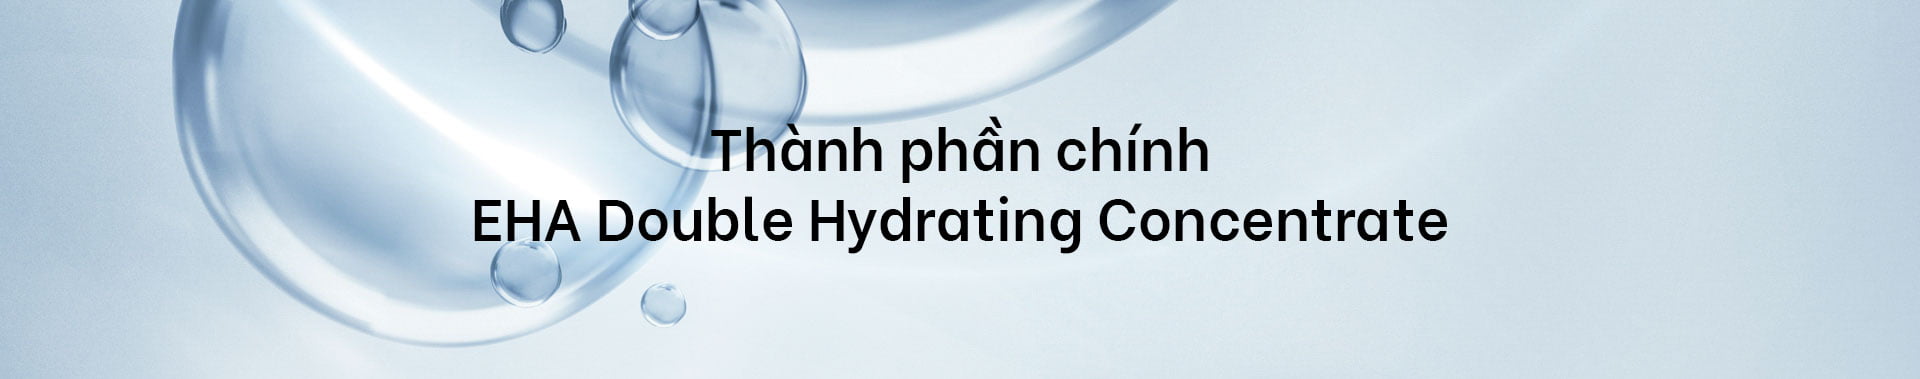 EHA Double Hydrating Concentrate